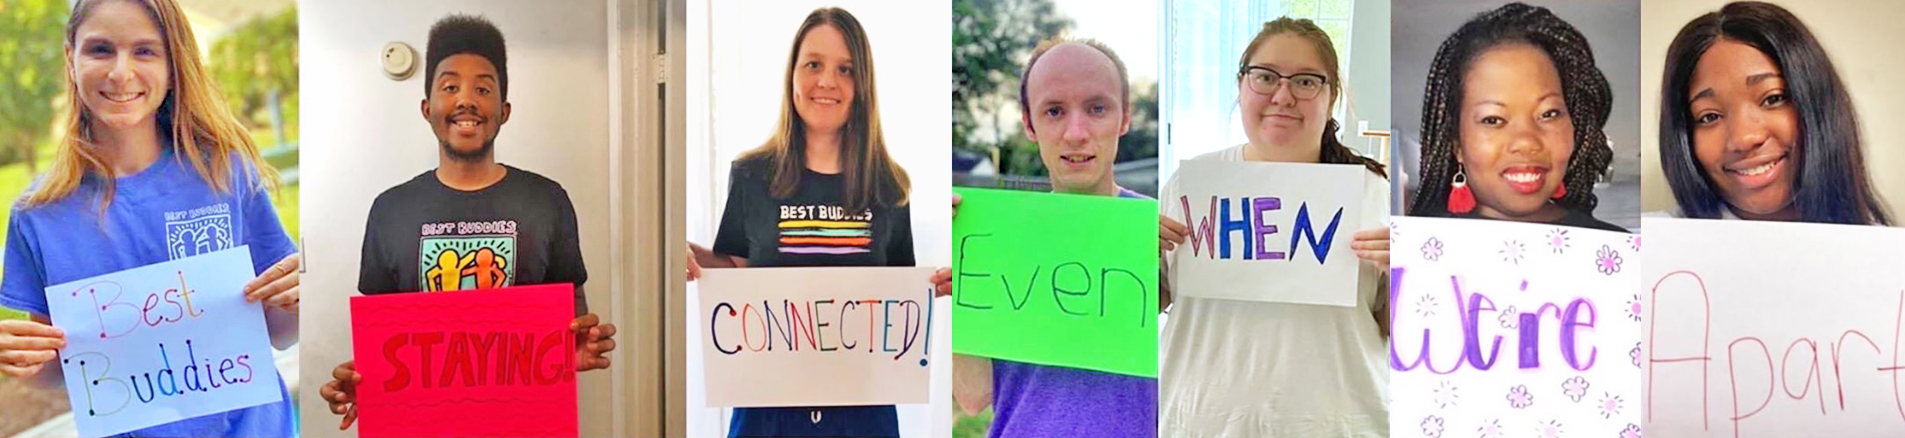 Share Your Story with Best Buddies using the Zoom Platform to communicate while holding signs